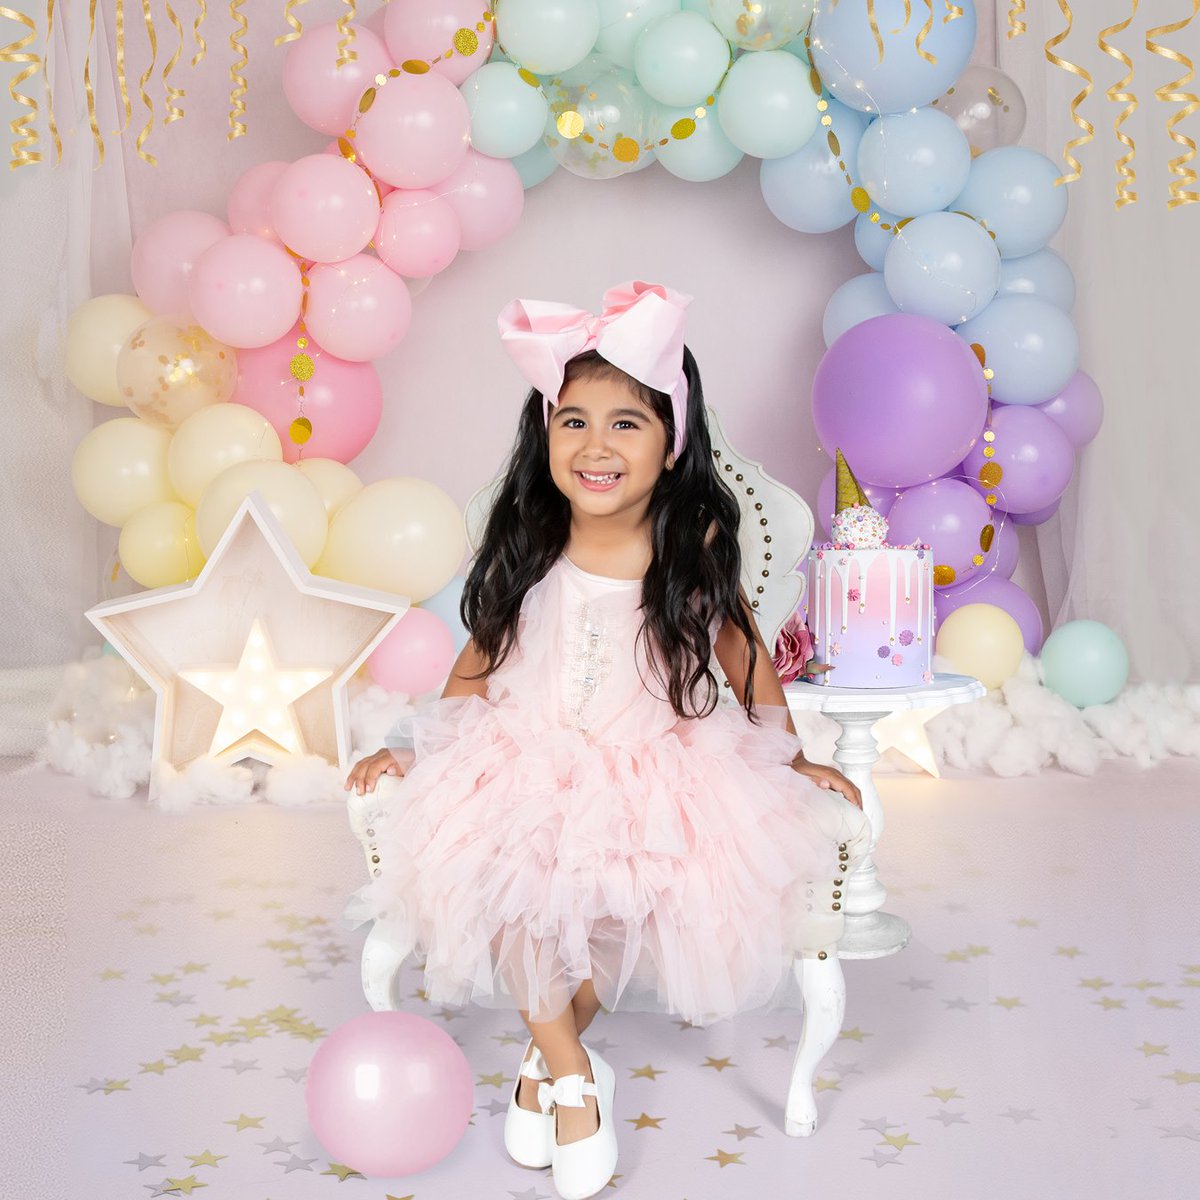 #HBD! 🪅 Annual birthday shoot. Hold these memories forever. Book your session TODAY. We offer costumes for kiddos up to size 10. 🎀
.
#PhotographyStudio #ProfessionalPhotographers #BirthdayPhotoshoot #GlendalePhotography #LaHabraPhotography #StudioPhotographer